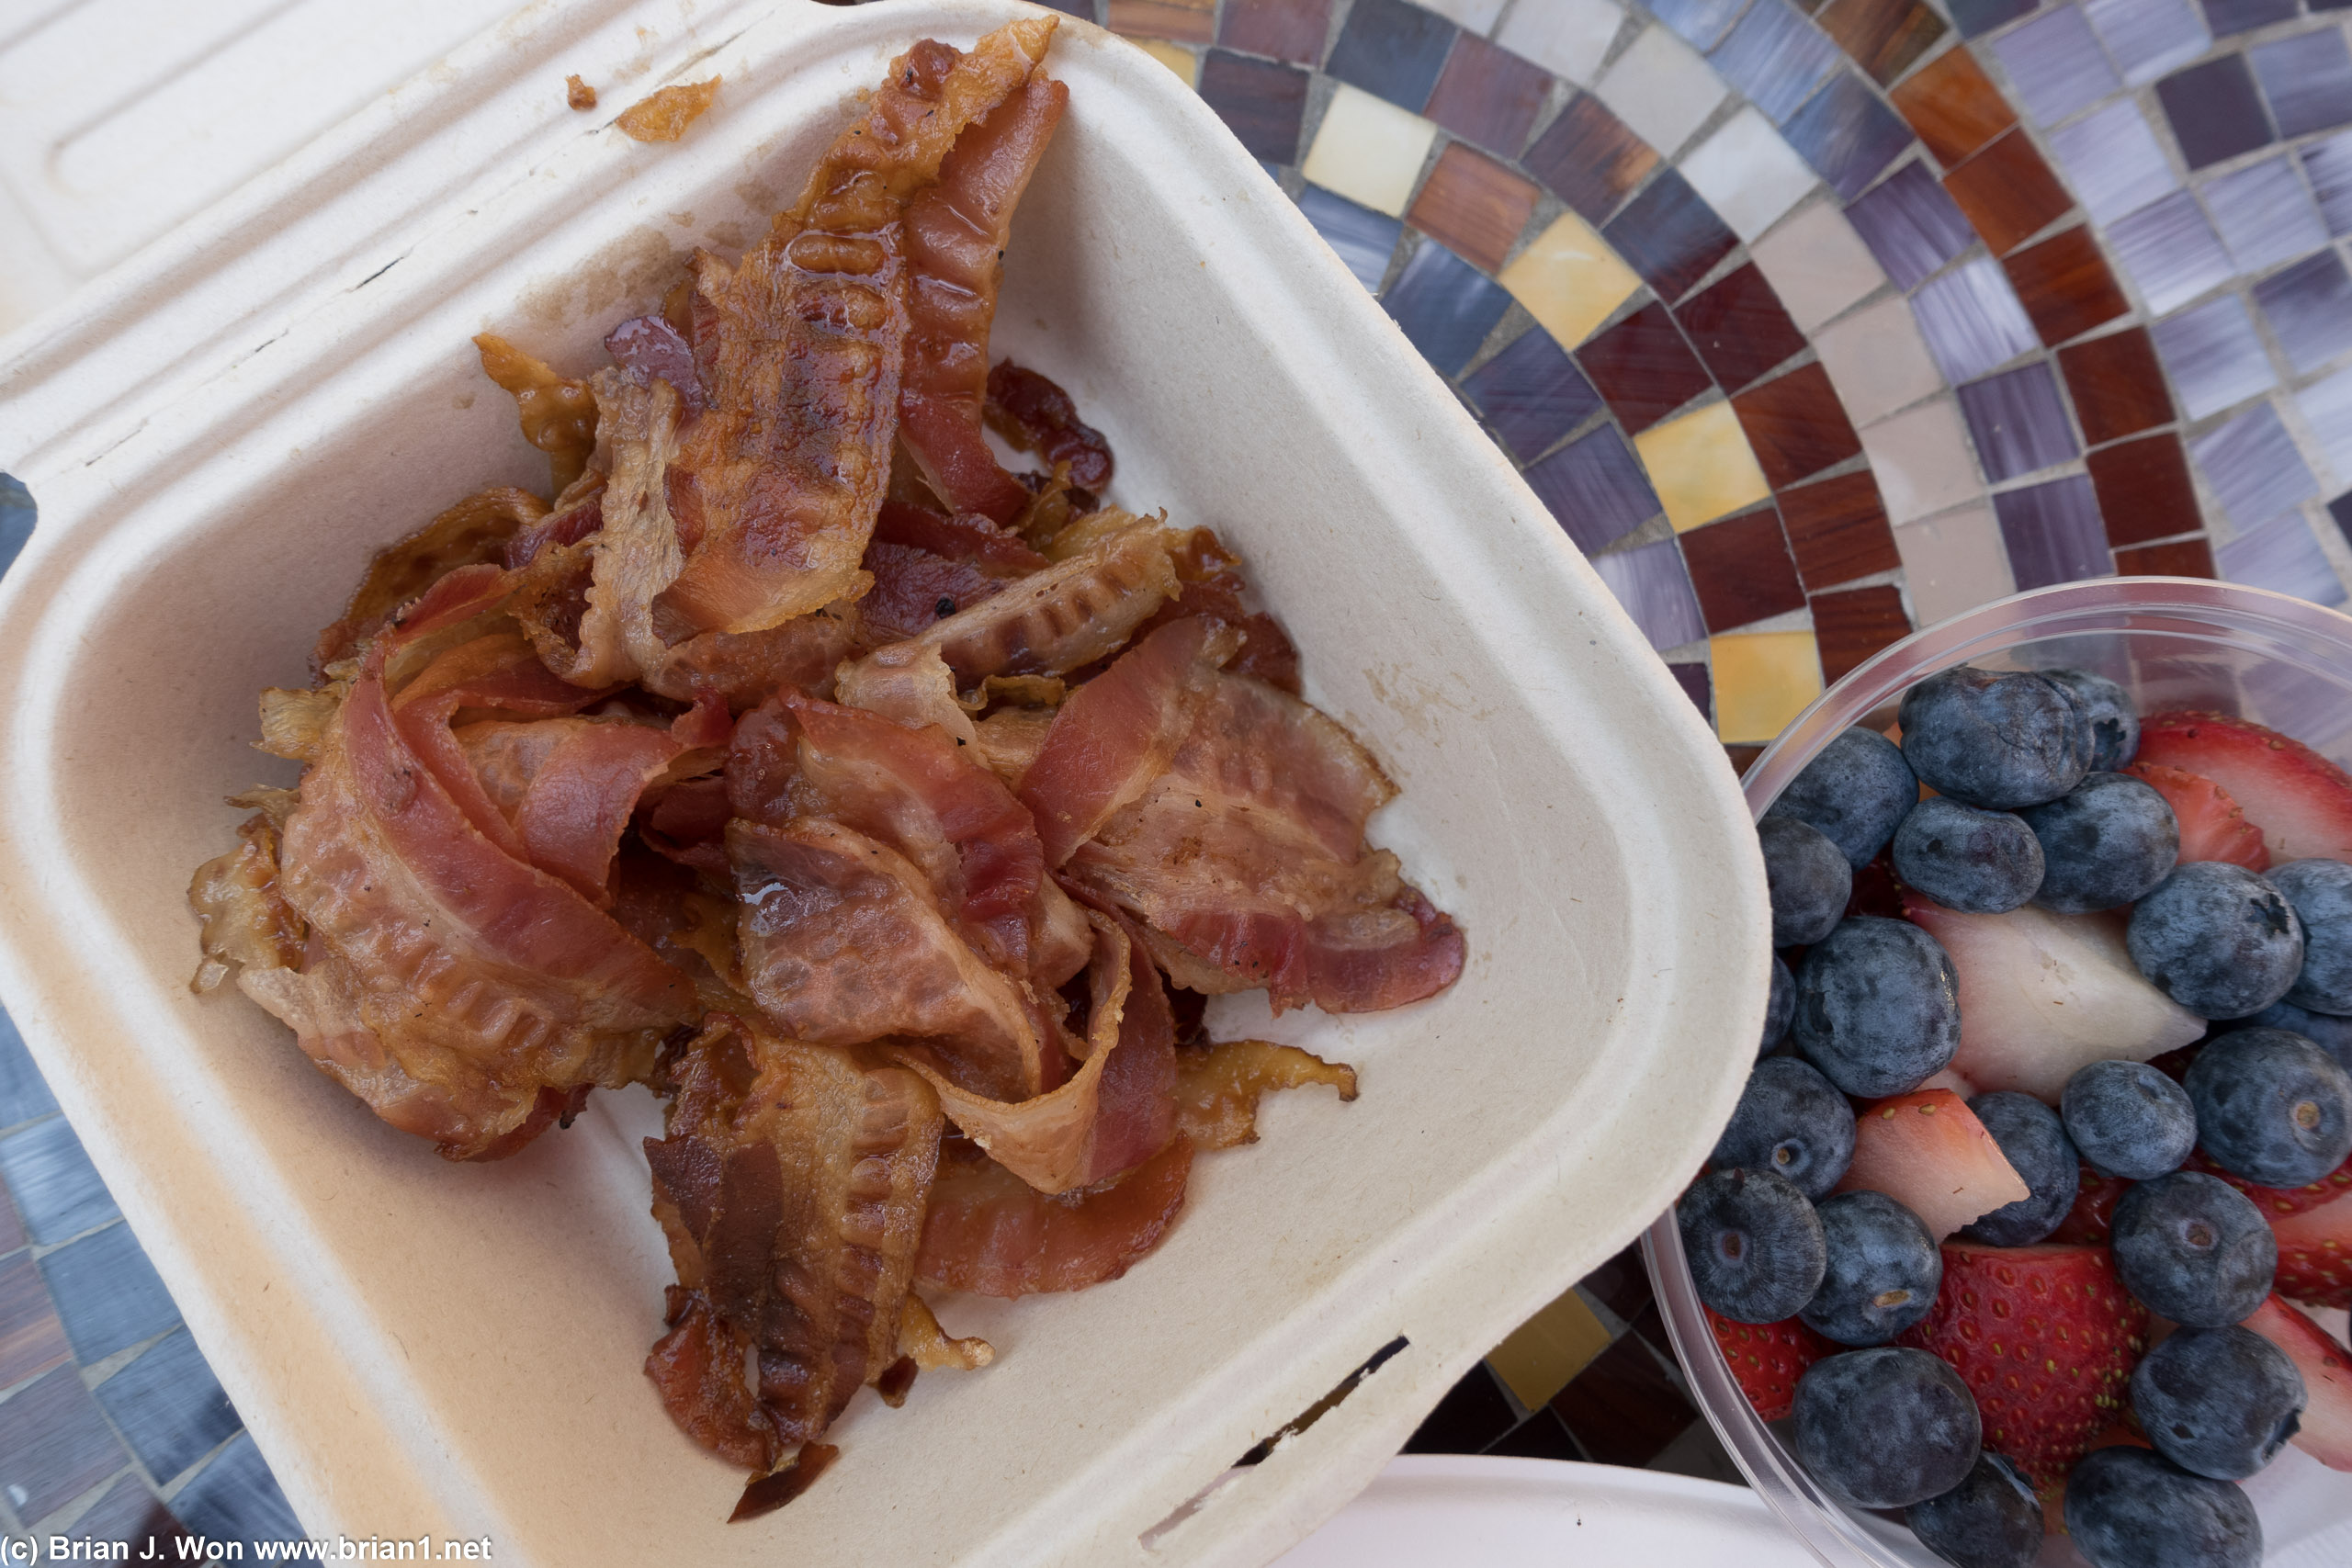 A massive amount of low-medium quality bacon with a very good fruit cup.